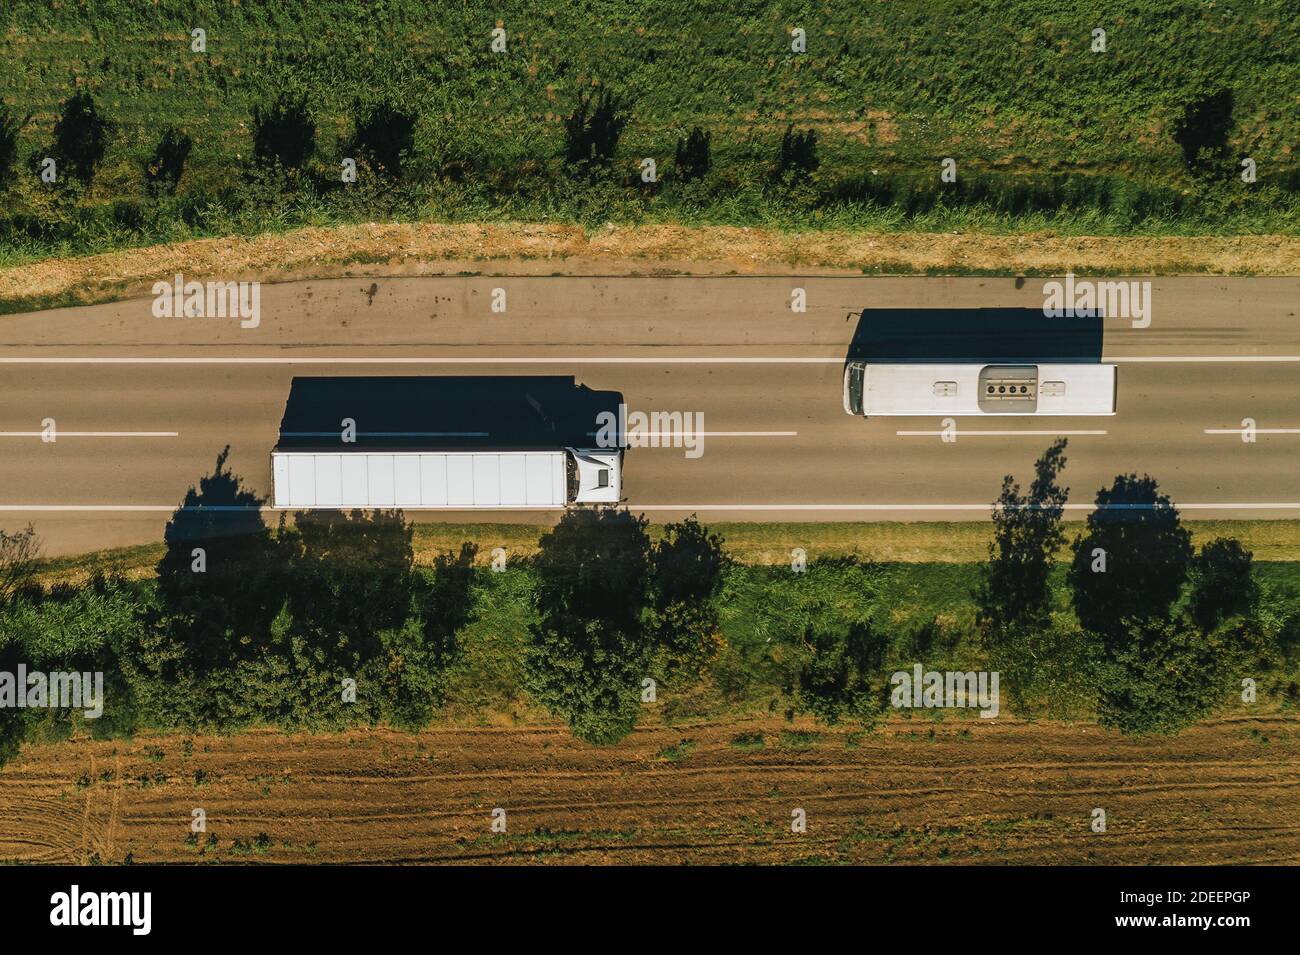 Truck and bus on the road from drone pov, top view of two vehicles passing by each other on roadway through countryside Stock Photo